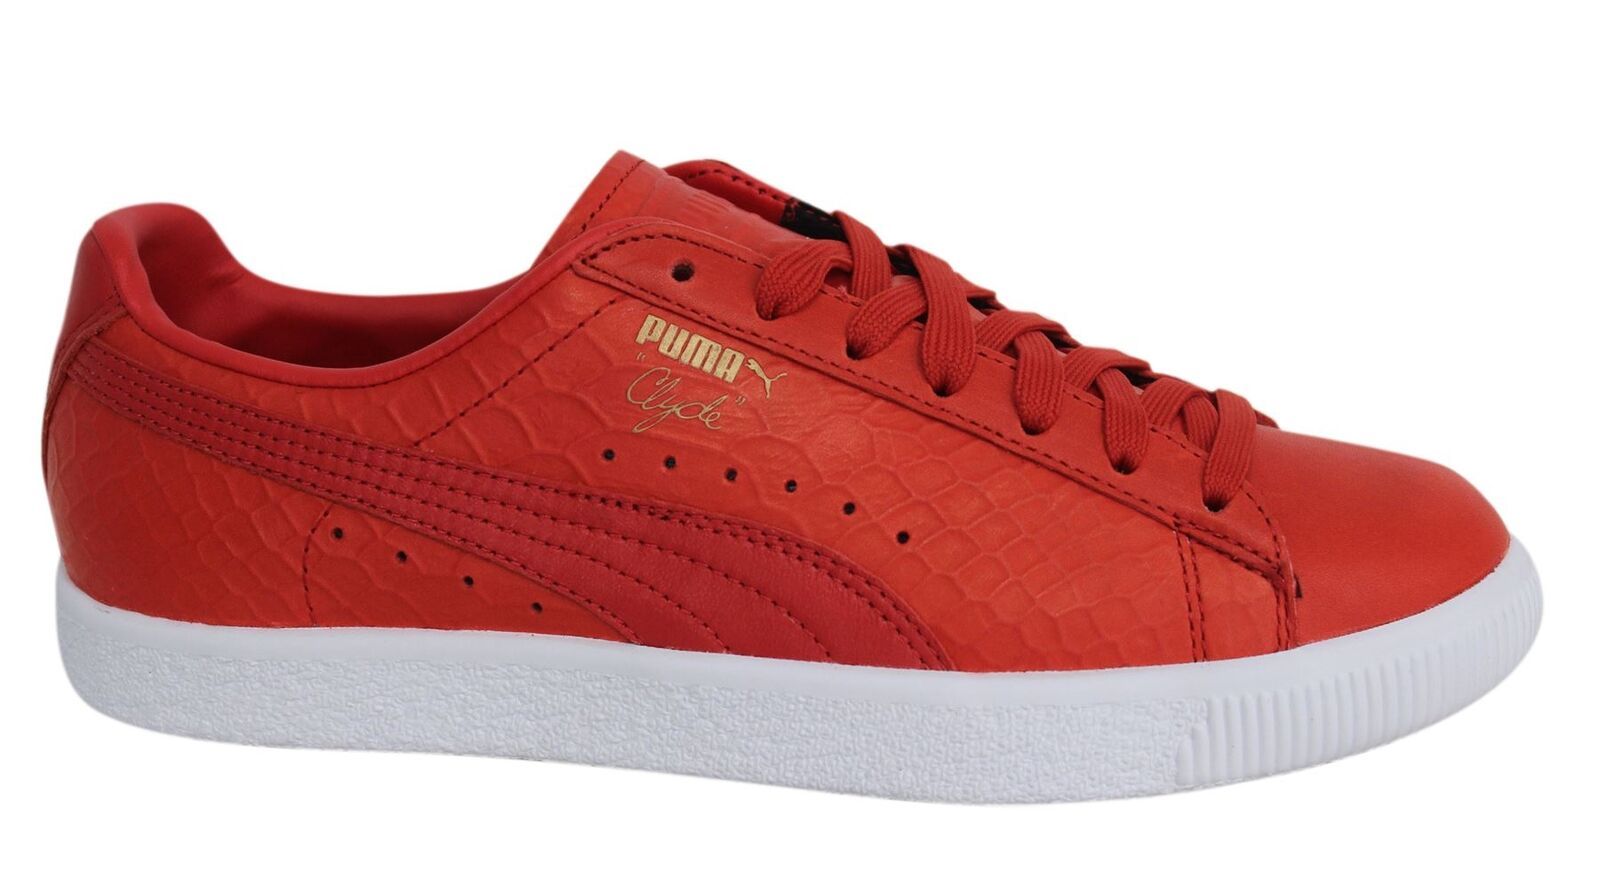 Puma Clyde Dressed Lace Up Red Leather Mens Trainers 361704 03 B67C